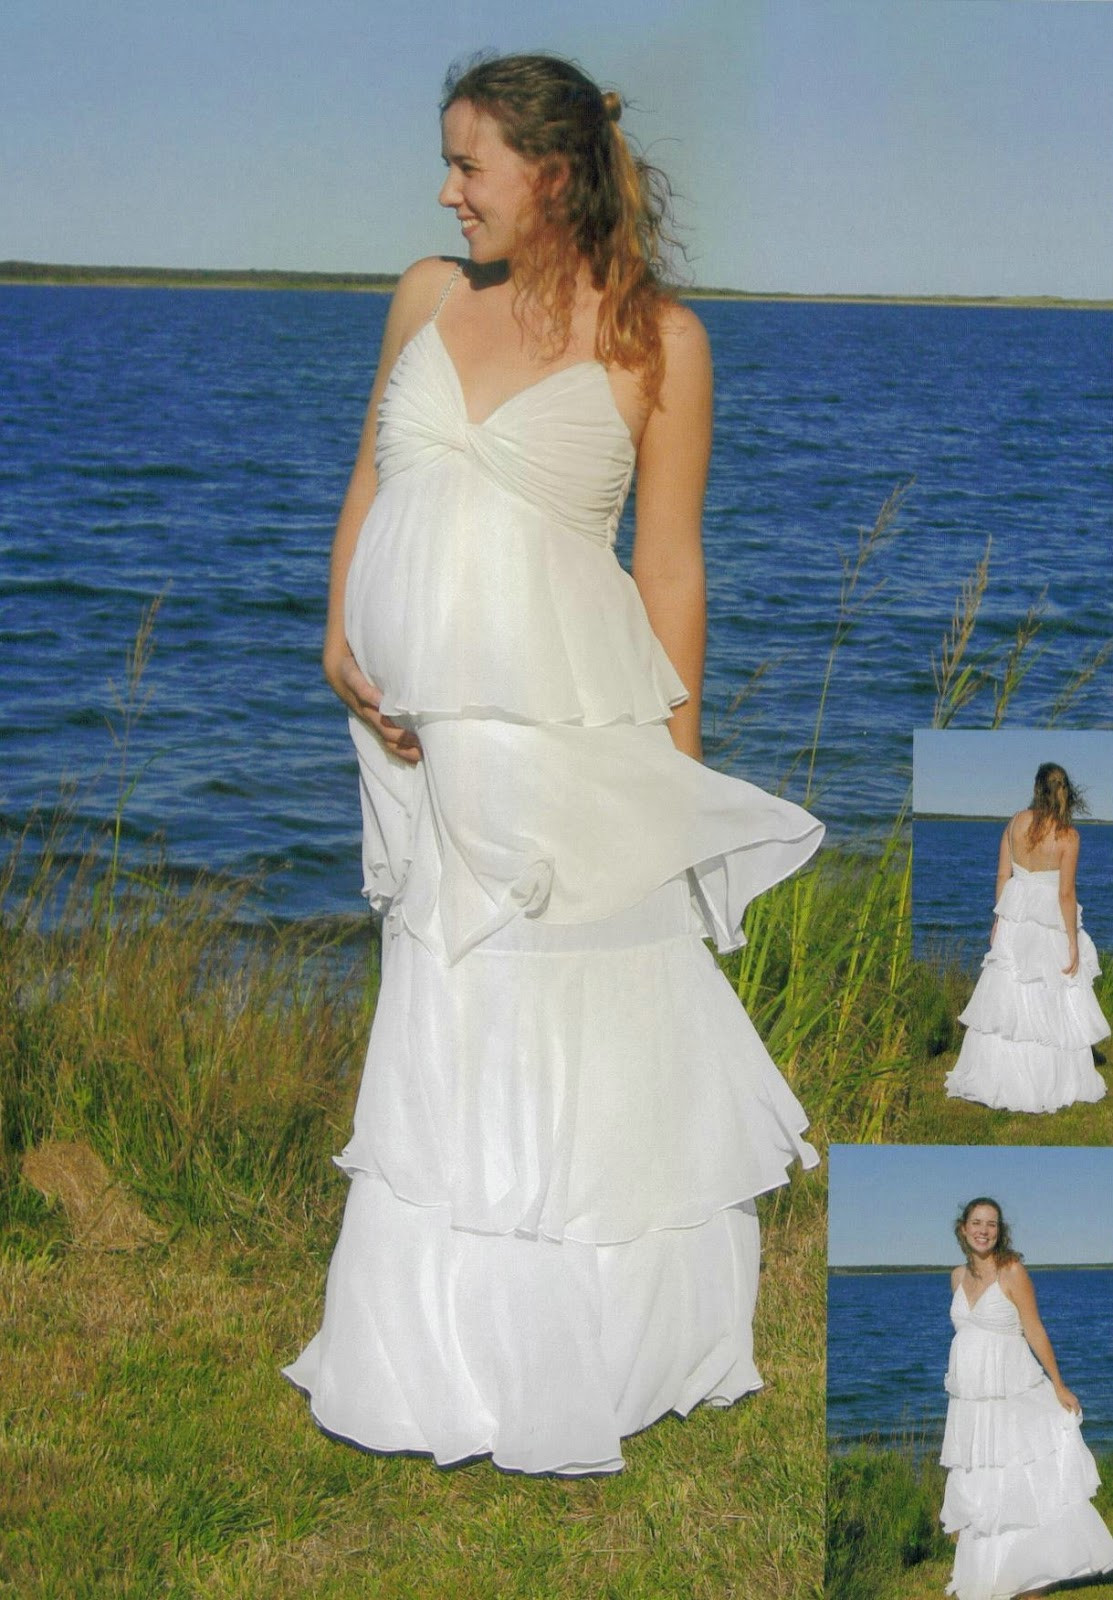 Pregnancy Wedding Gowns
 WhiteAzalea Maternity Dresses Are You Ready for a